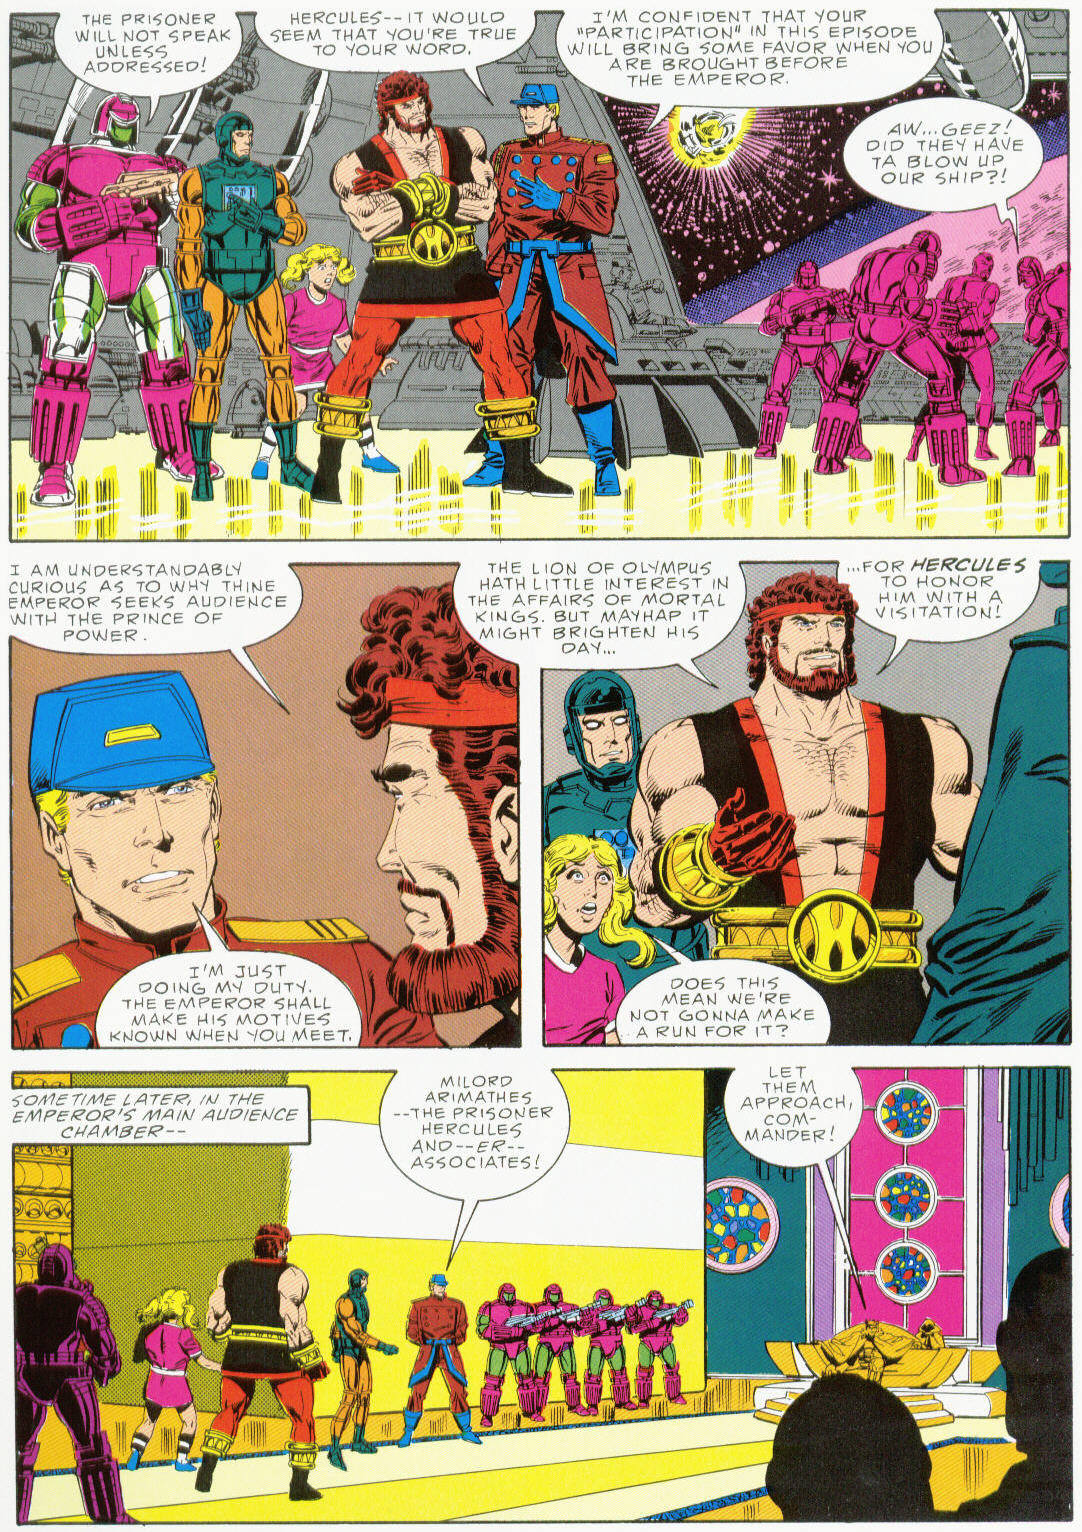 Marvel Graphic Novel issue 37 - Hercules Prince of Power - Full Circle - Page 34